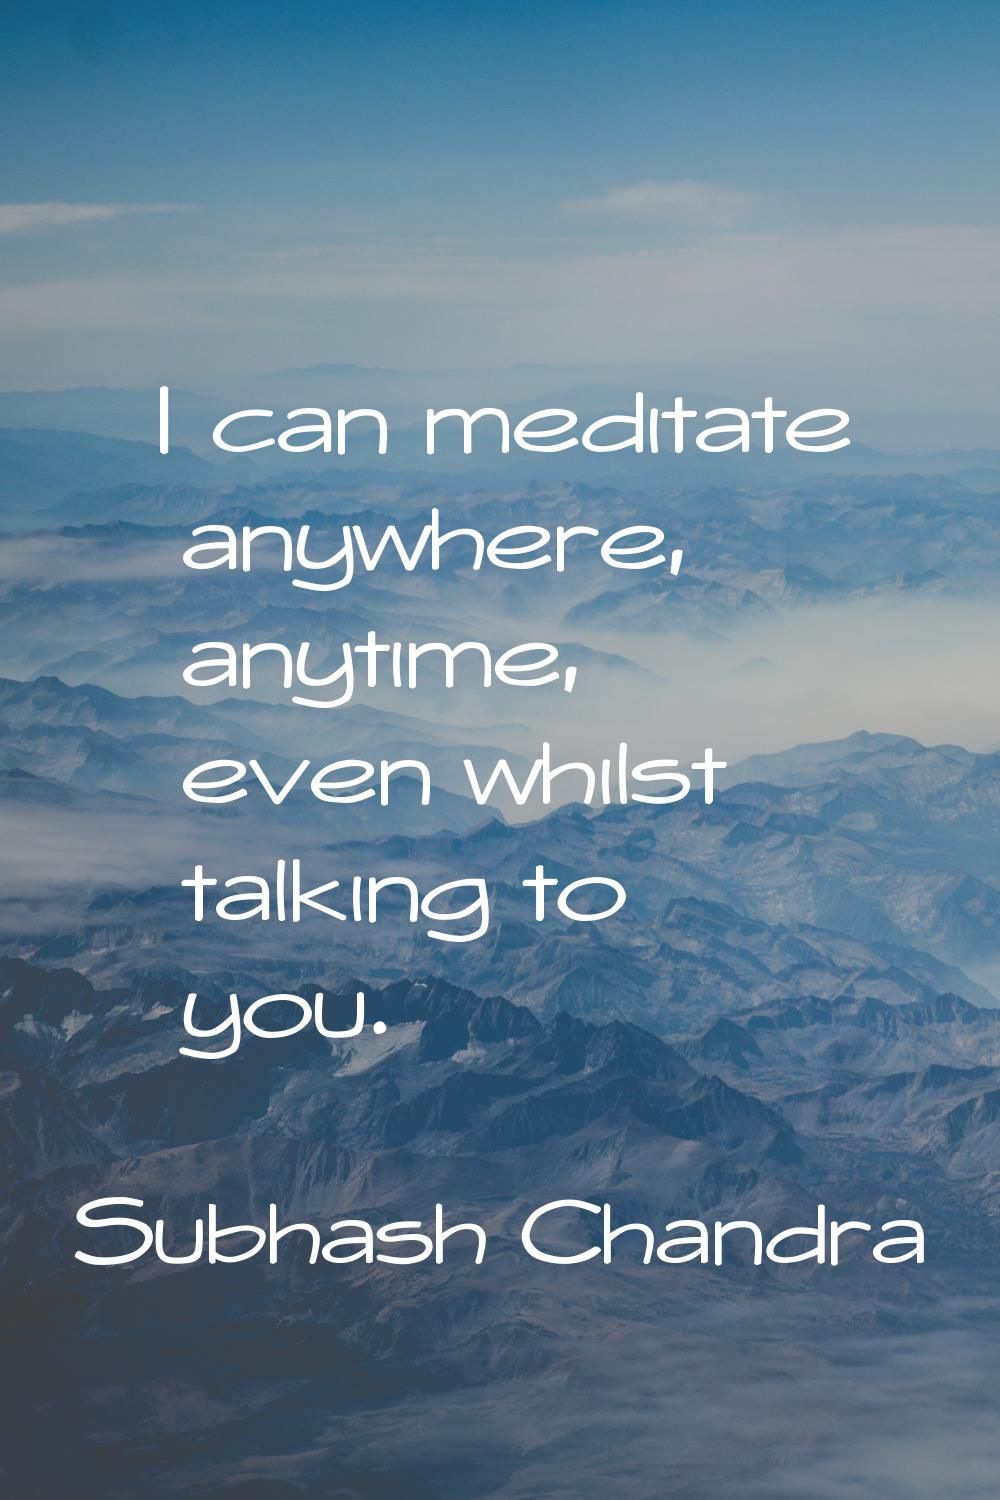 I can meditate anywhere, anytime, even whilst talking to you.